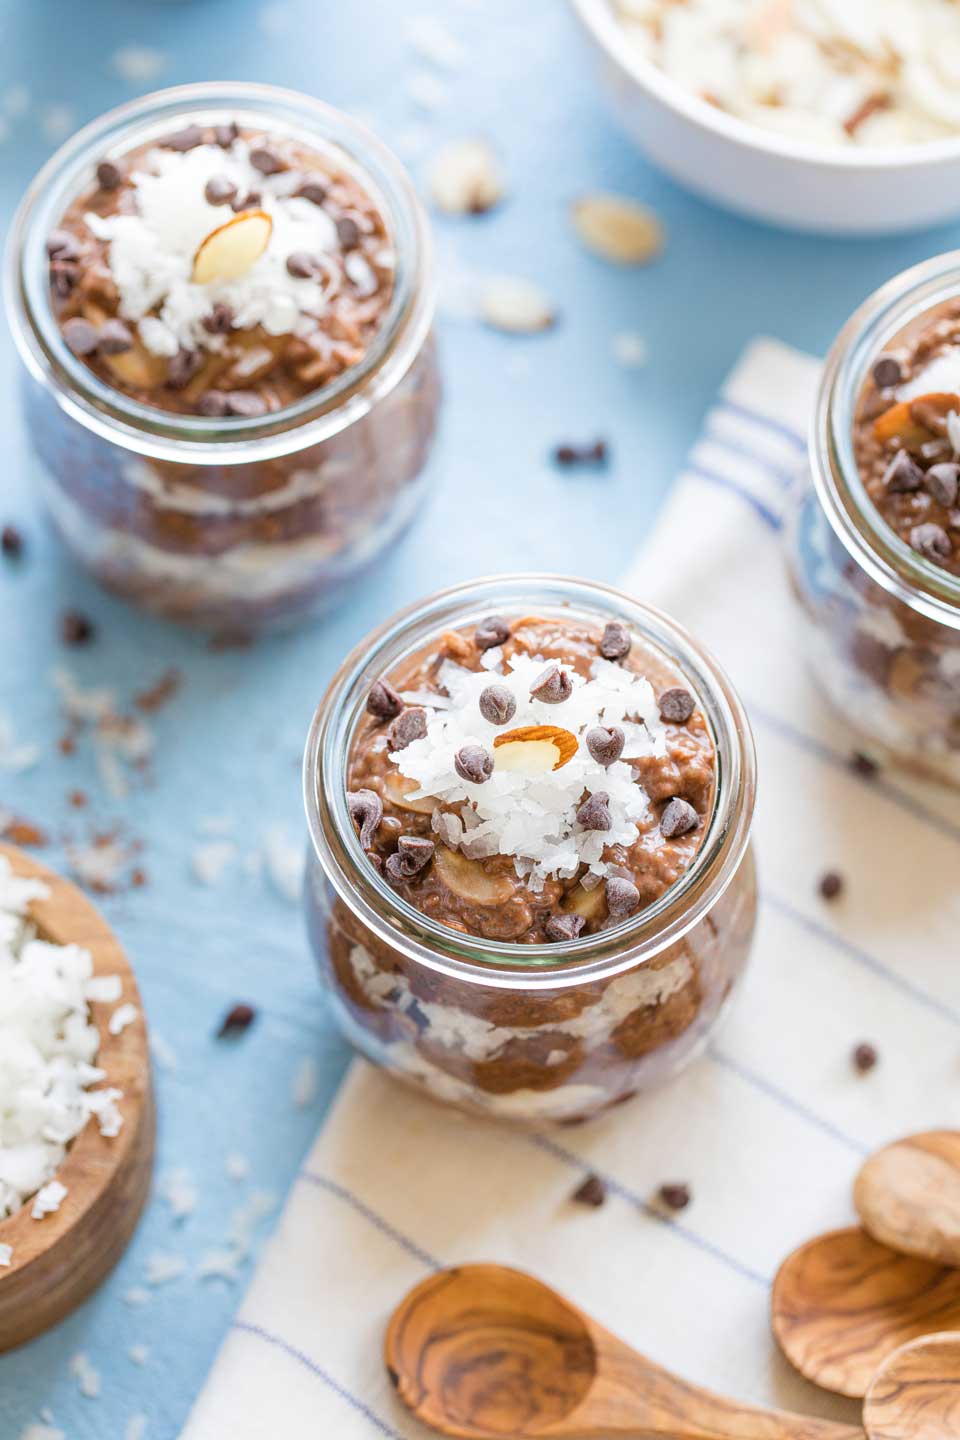 Overhead view of several glass jars of this chia pudding, with chocolate chips scattered around and bowls of additional toppings nearby.